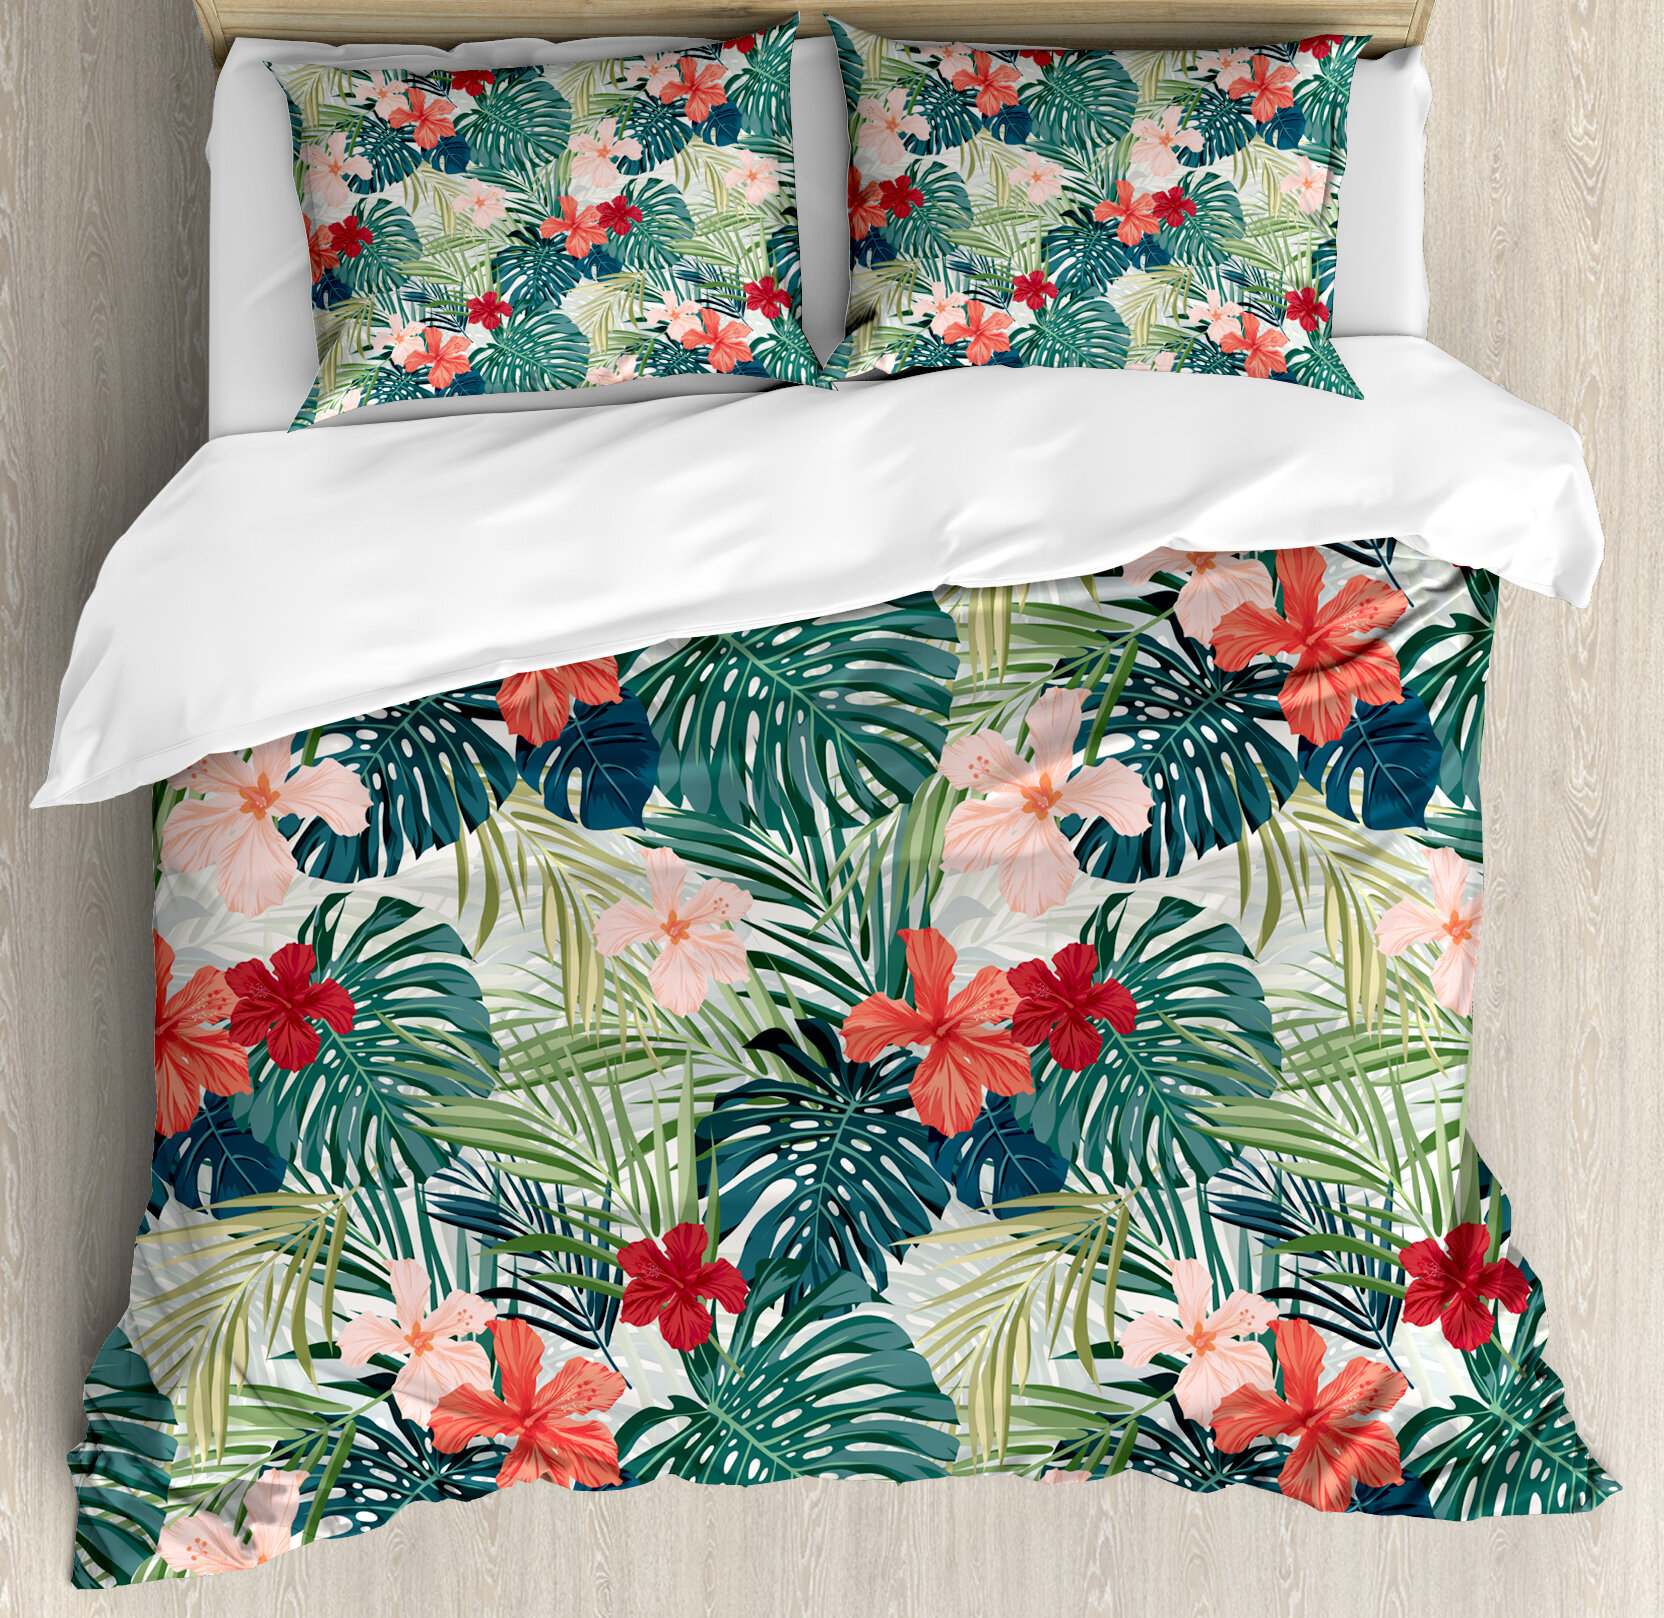 Dark Green Green Ambesonne Leaf Flat Sheet Soft Comfortable Top Sheet Decorative Bedding 1 Piece Summer Beach Holiday Themed Hibiscus Plumeria Crepe Ginger Flowers Twin Size